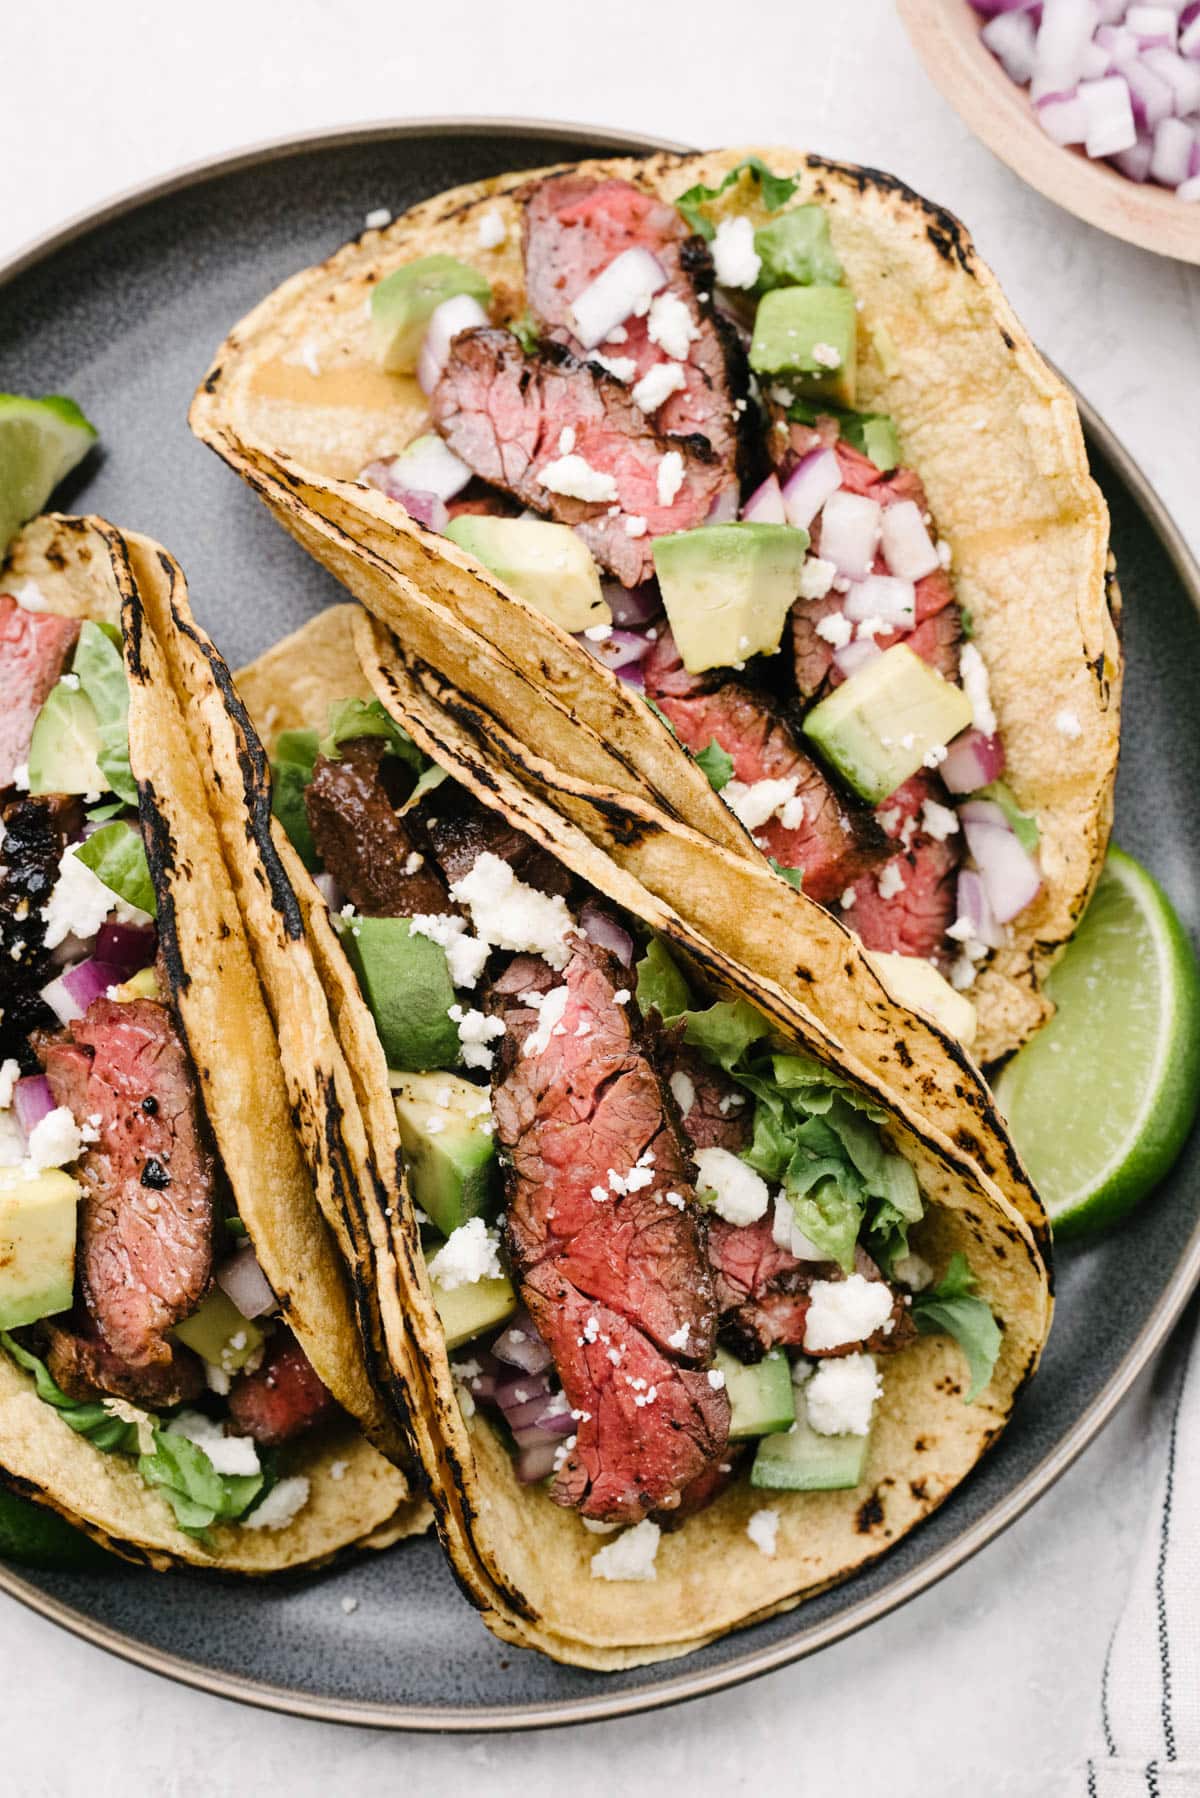 Three skirt steak tacos in corn tortilla shells on a grey plate, each topped with diced avocado, red onion, and crumbled queso fresco cheese.